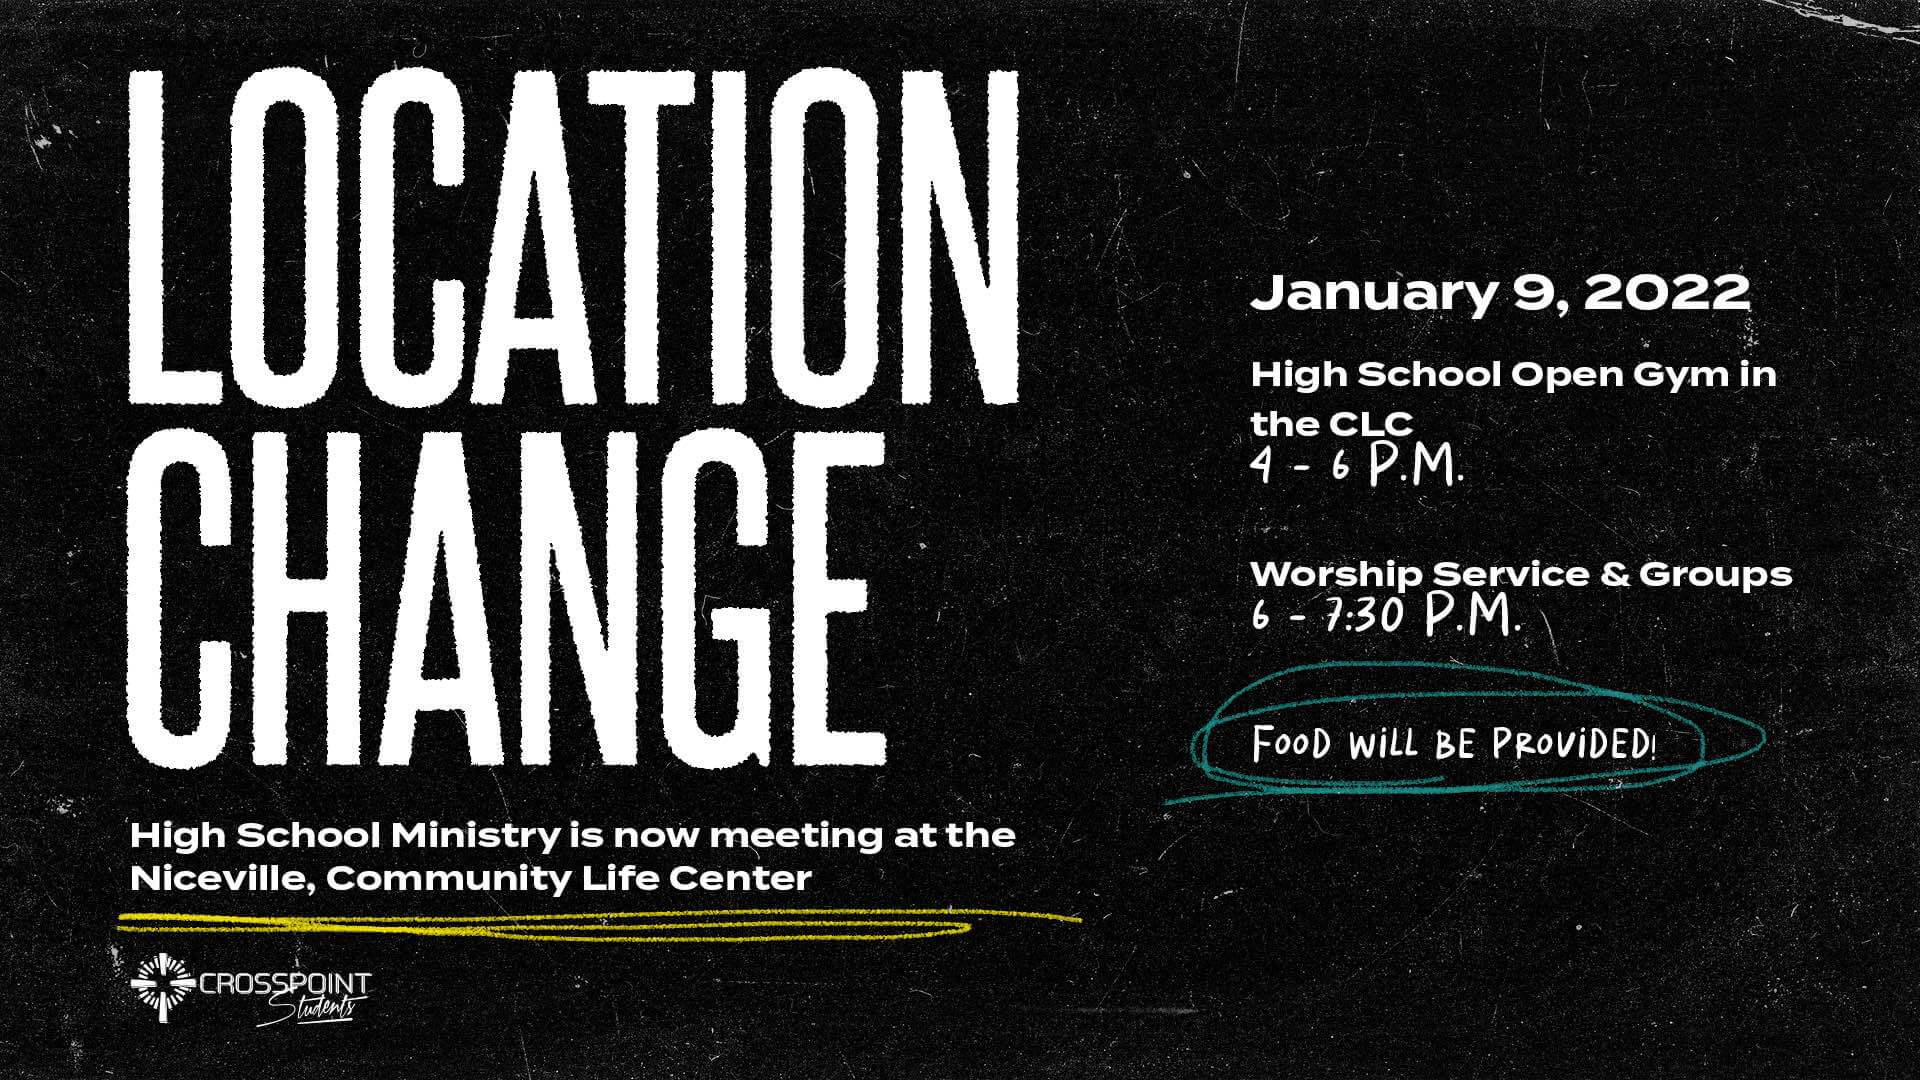 High School Ministry is now meeting at the Niceville Community Life Center beginning January 9, 2022